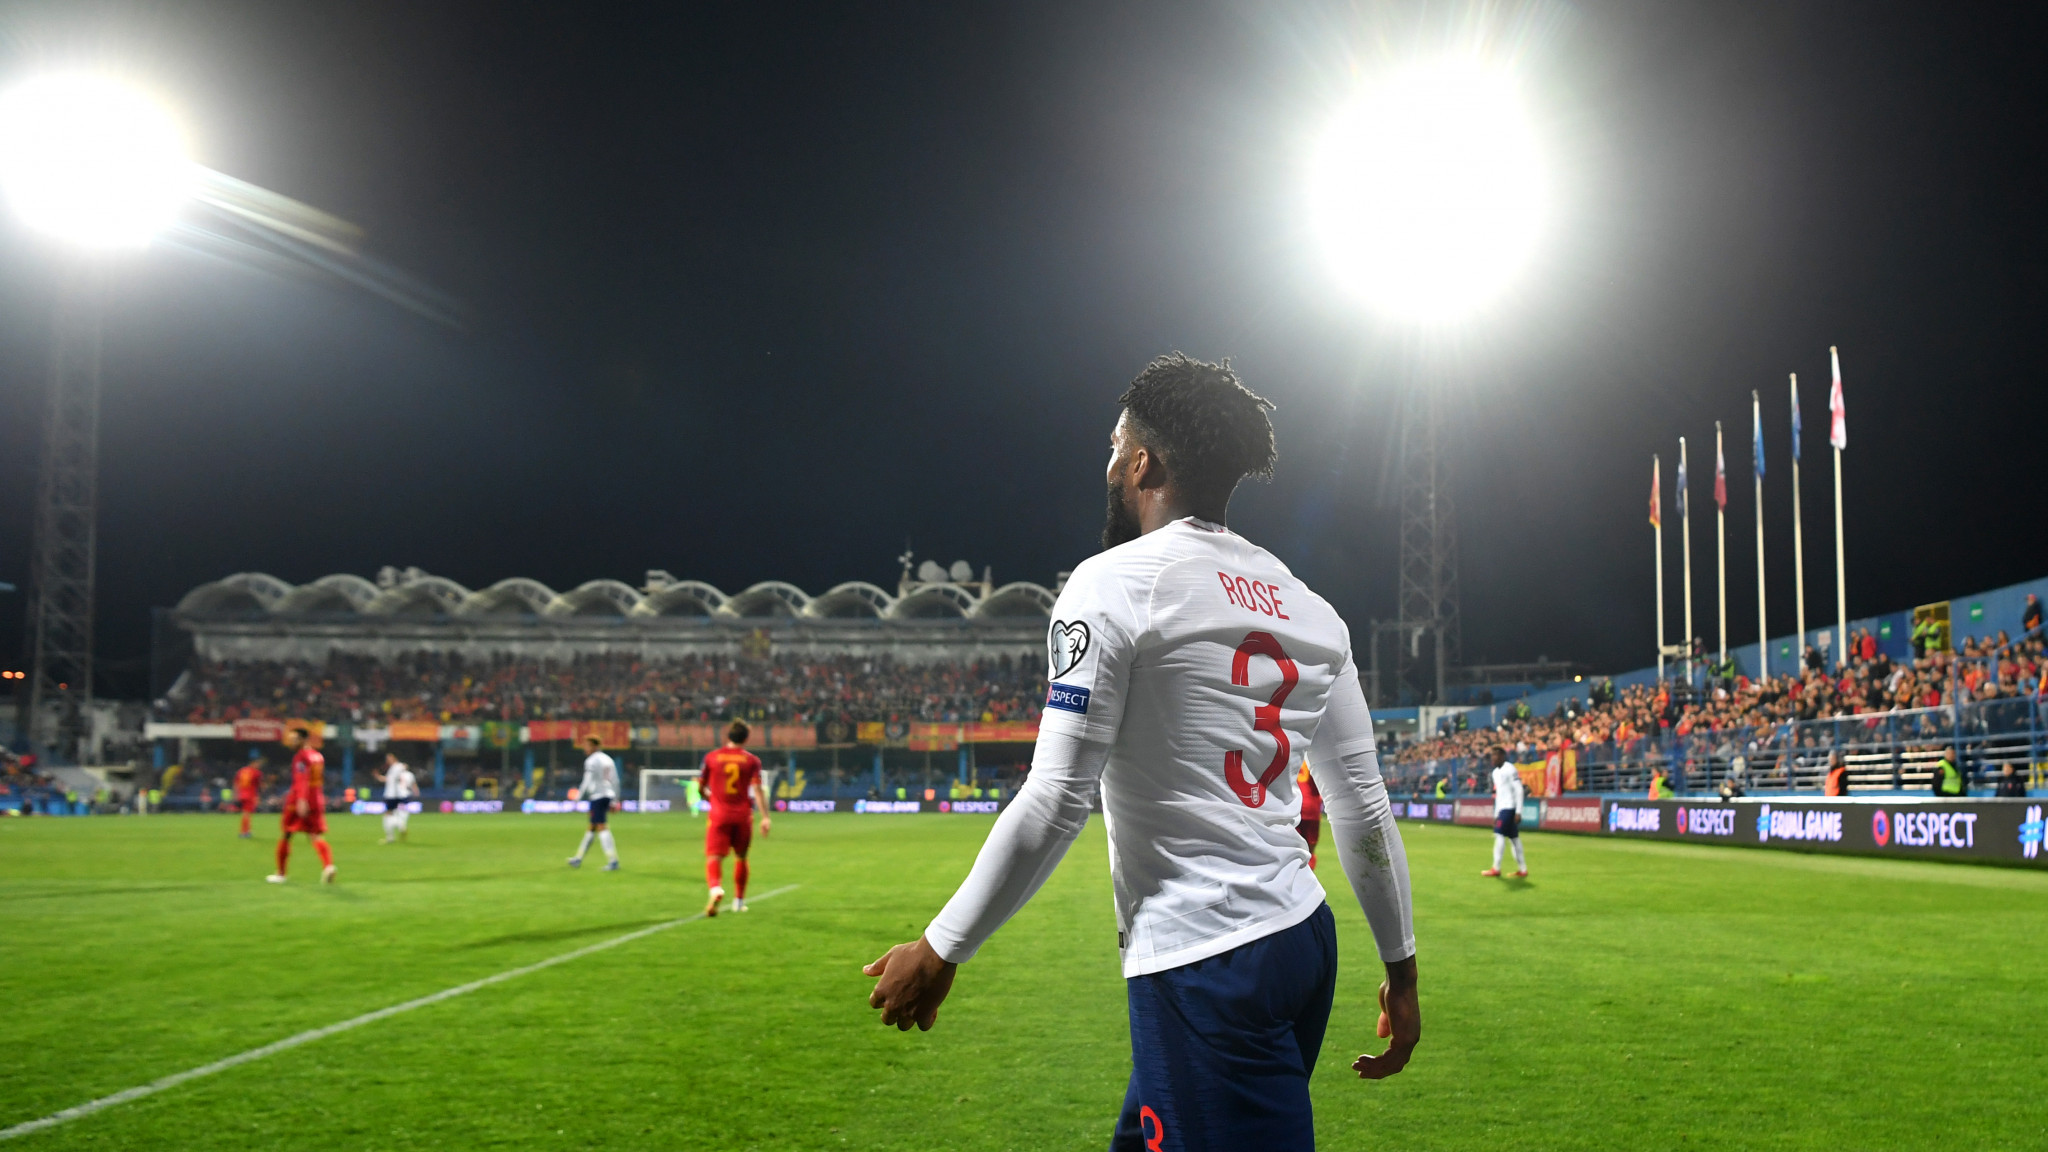 Danny Rose was one of the players who said he was targeted at Podgorica City Stadium ©Getty Images